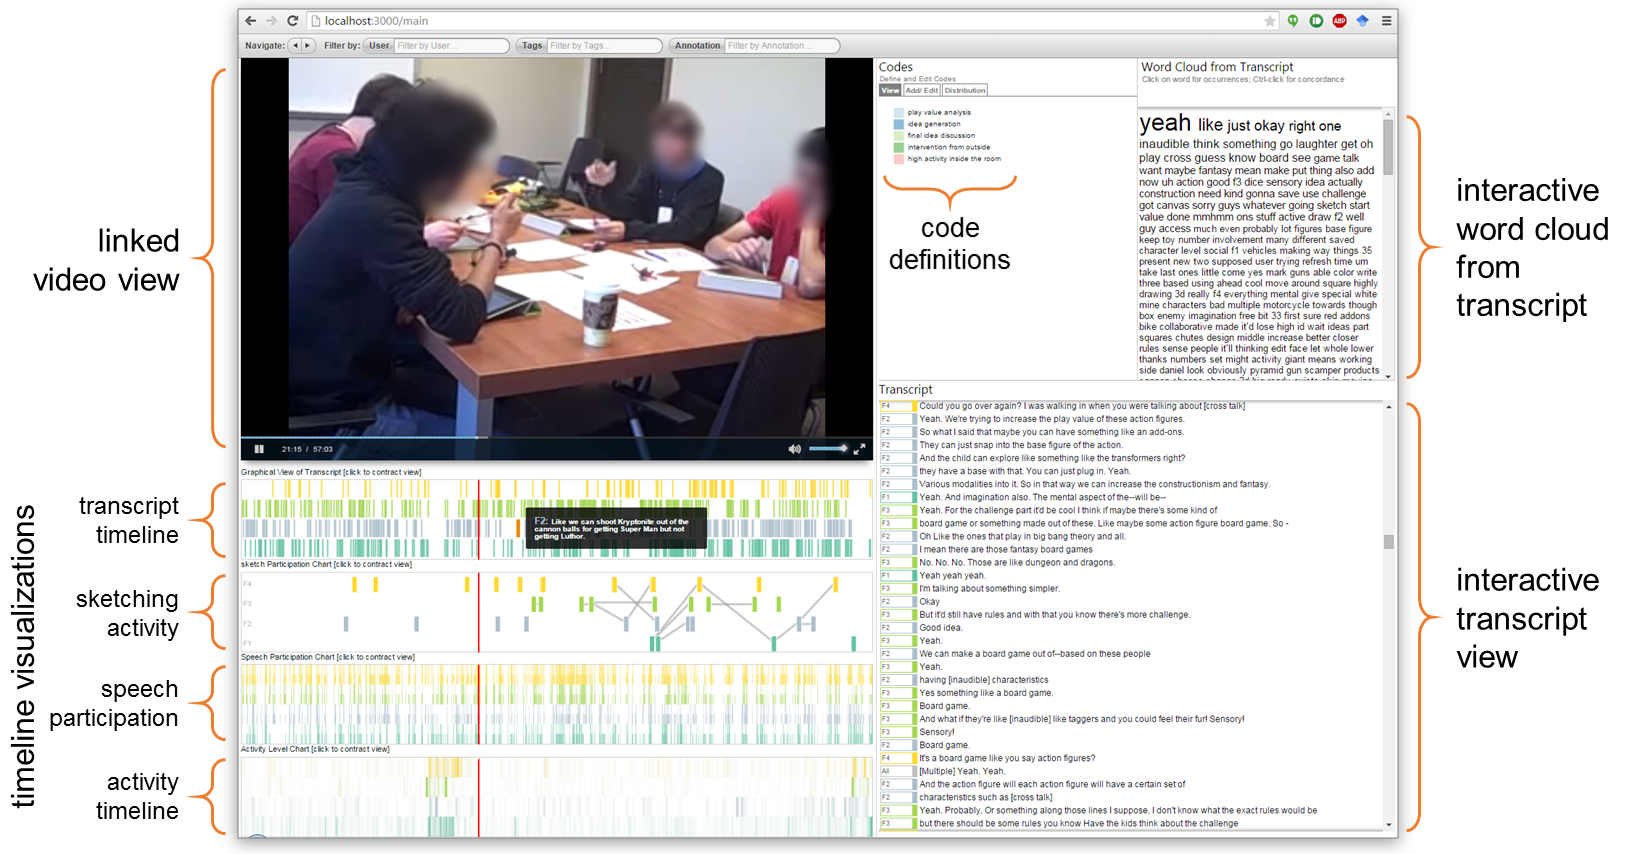 Actions may Speak Louder, but Words Provide Context: Visualizing Multimodal Data to Understand Collaboration